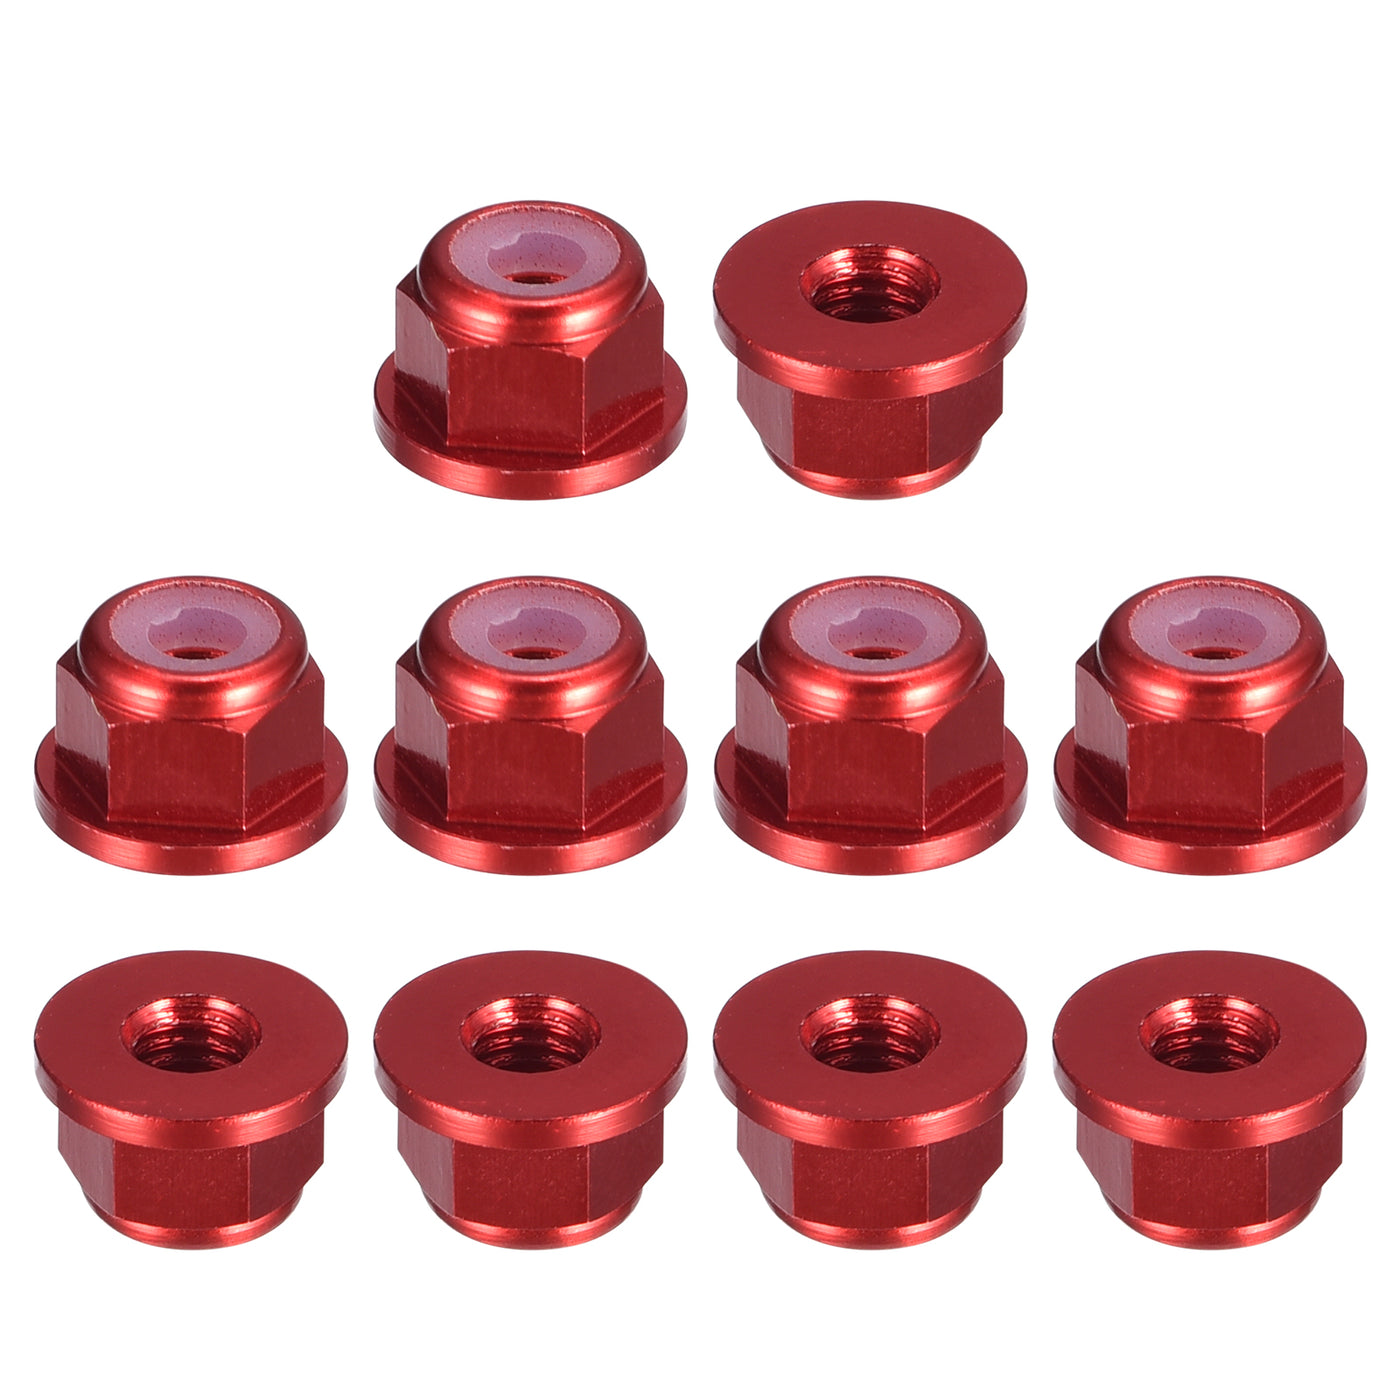 uxcell Uxcell Nylon Insert Hex Lock Nuts, 10pcs - M3 x 0.5mm Aluminum Alloy Self-Locking Nut, Anodizing Flange Lock Nut for Fasteners (Claret)